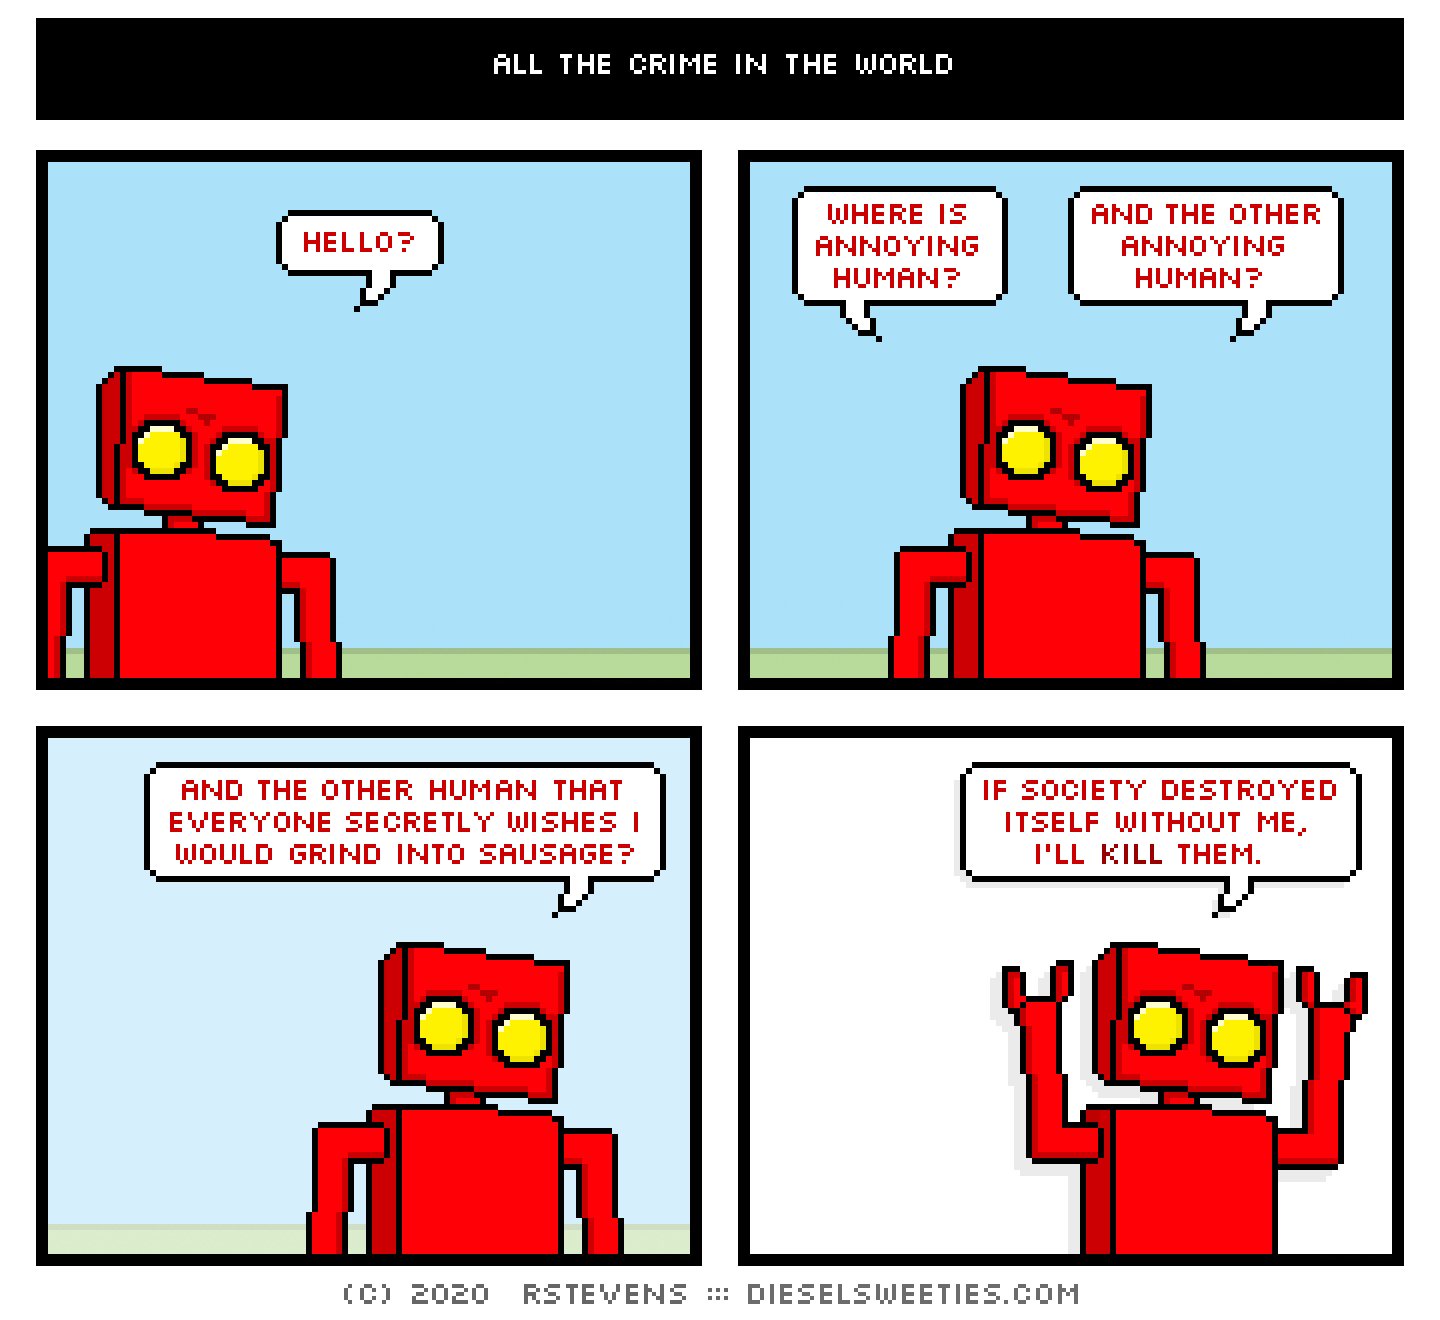 red robot: where is annoying human?
red robot: and the other annoying human?
red robot: and the other human that everyone secretly wishes i would grind into sausage?
red robot: if society destroyed itself without me, i'll kill them.